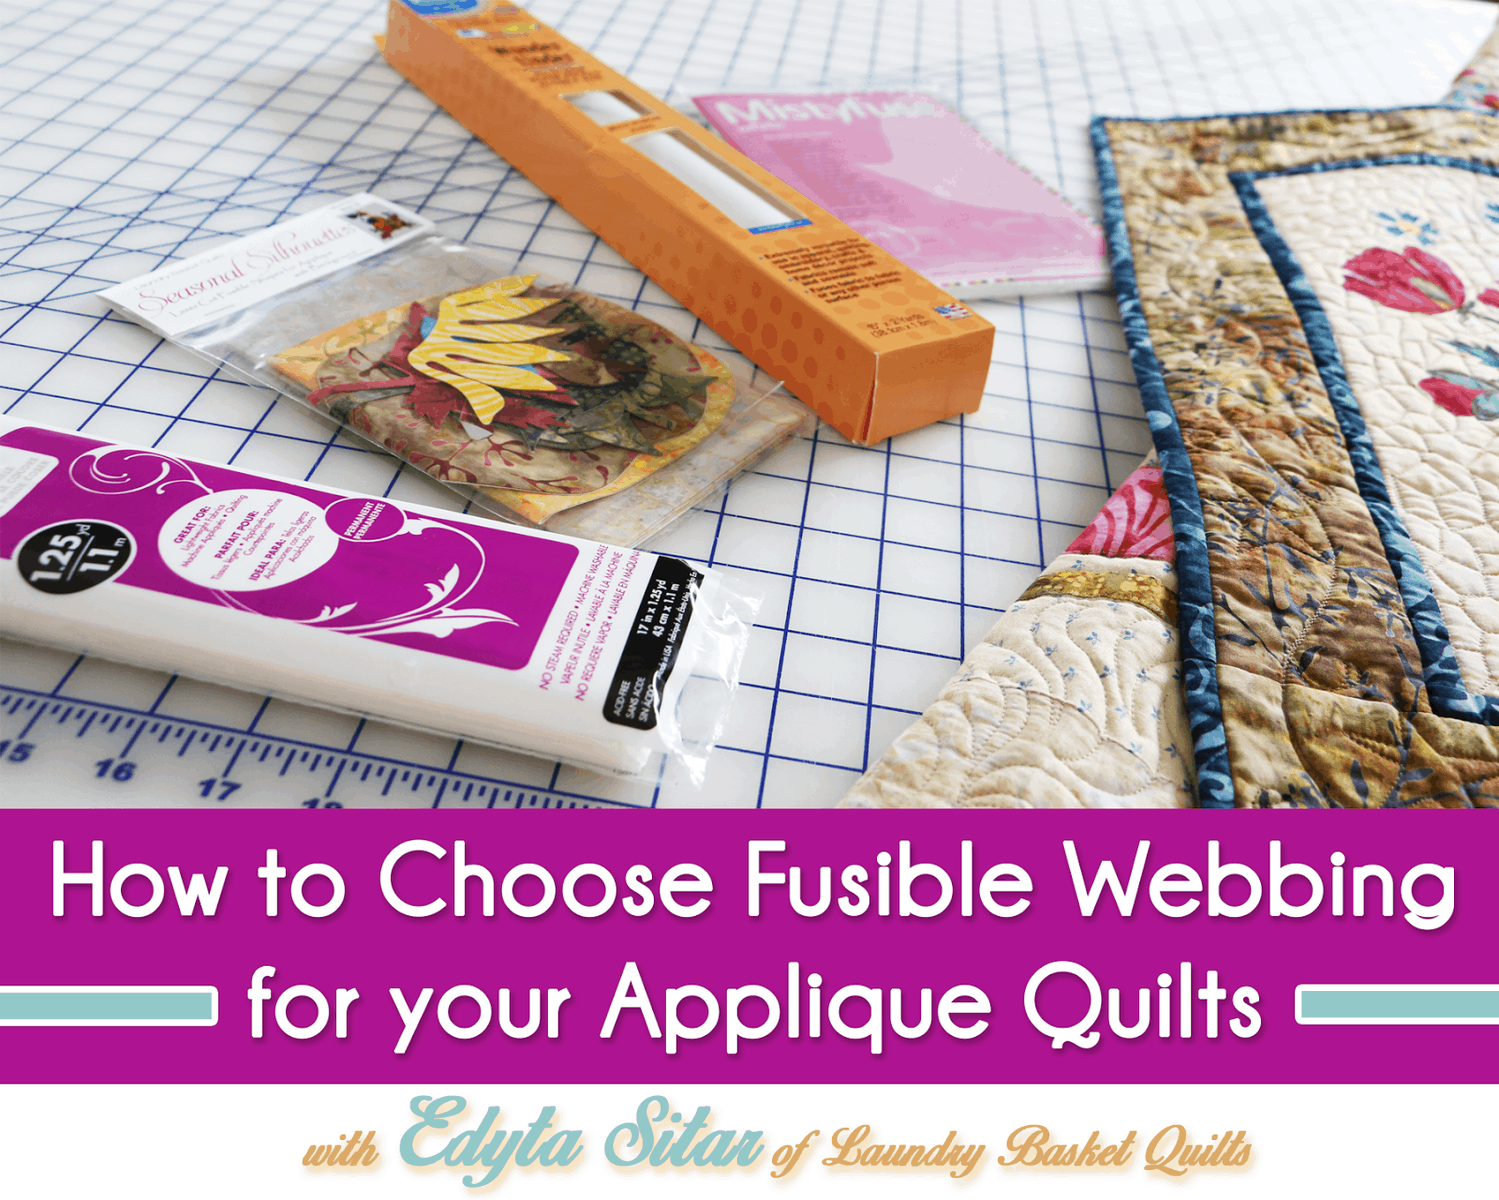 Fusible Web: What It Is and How to Use It, No-Sew Applique